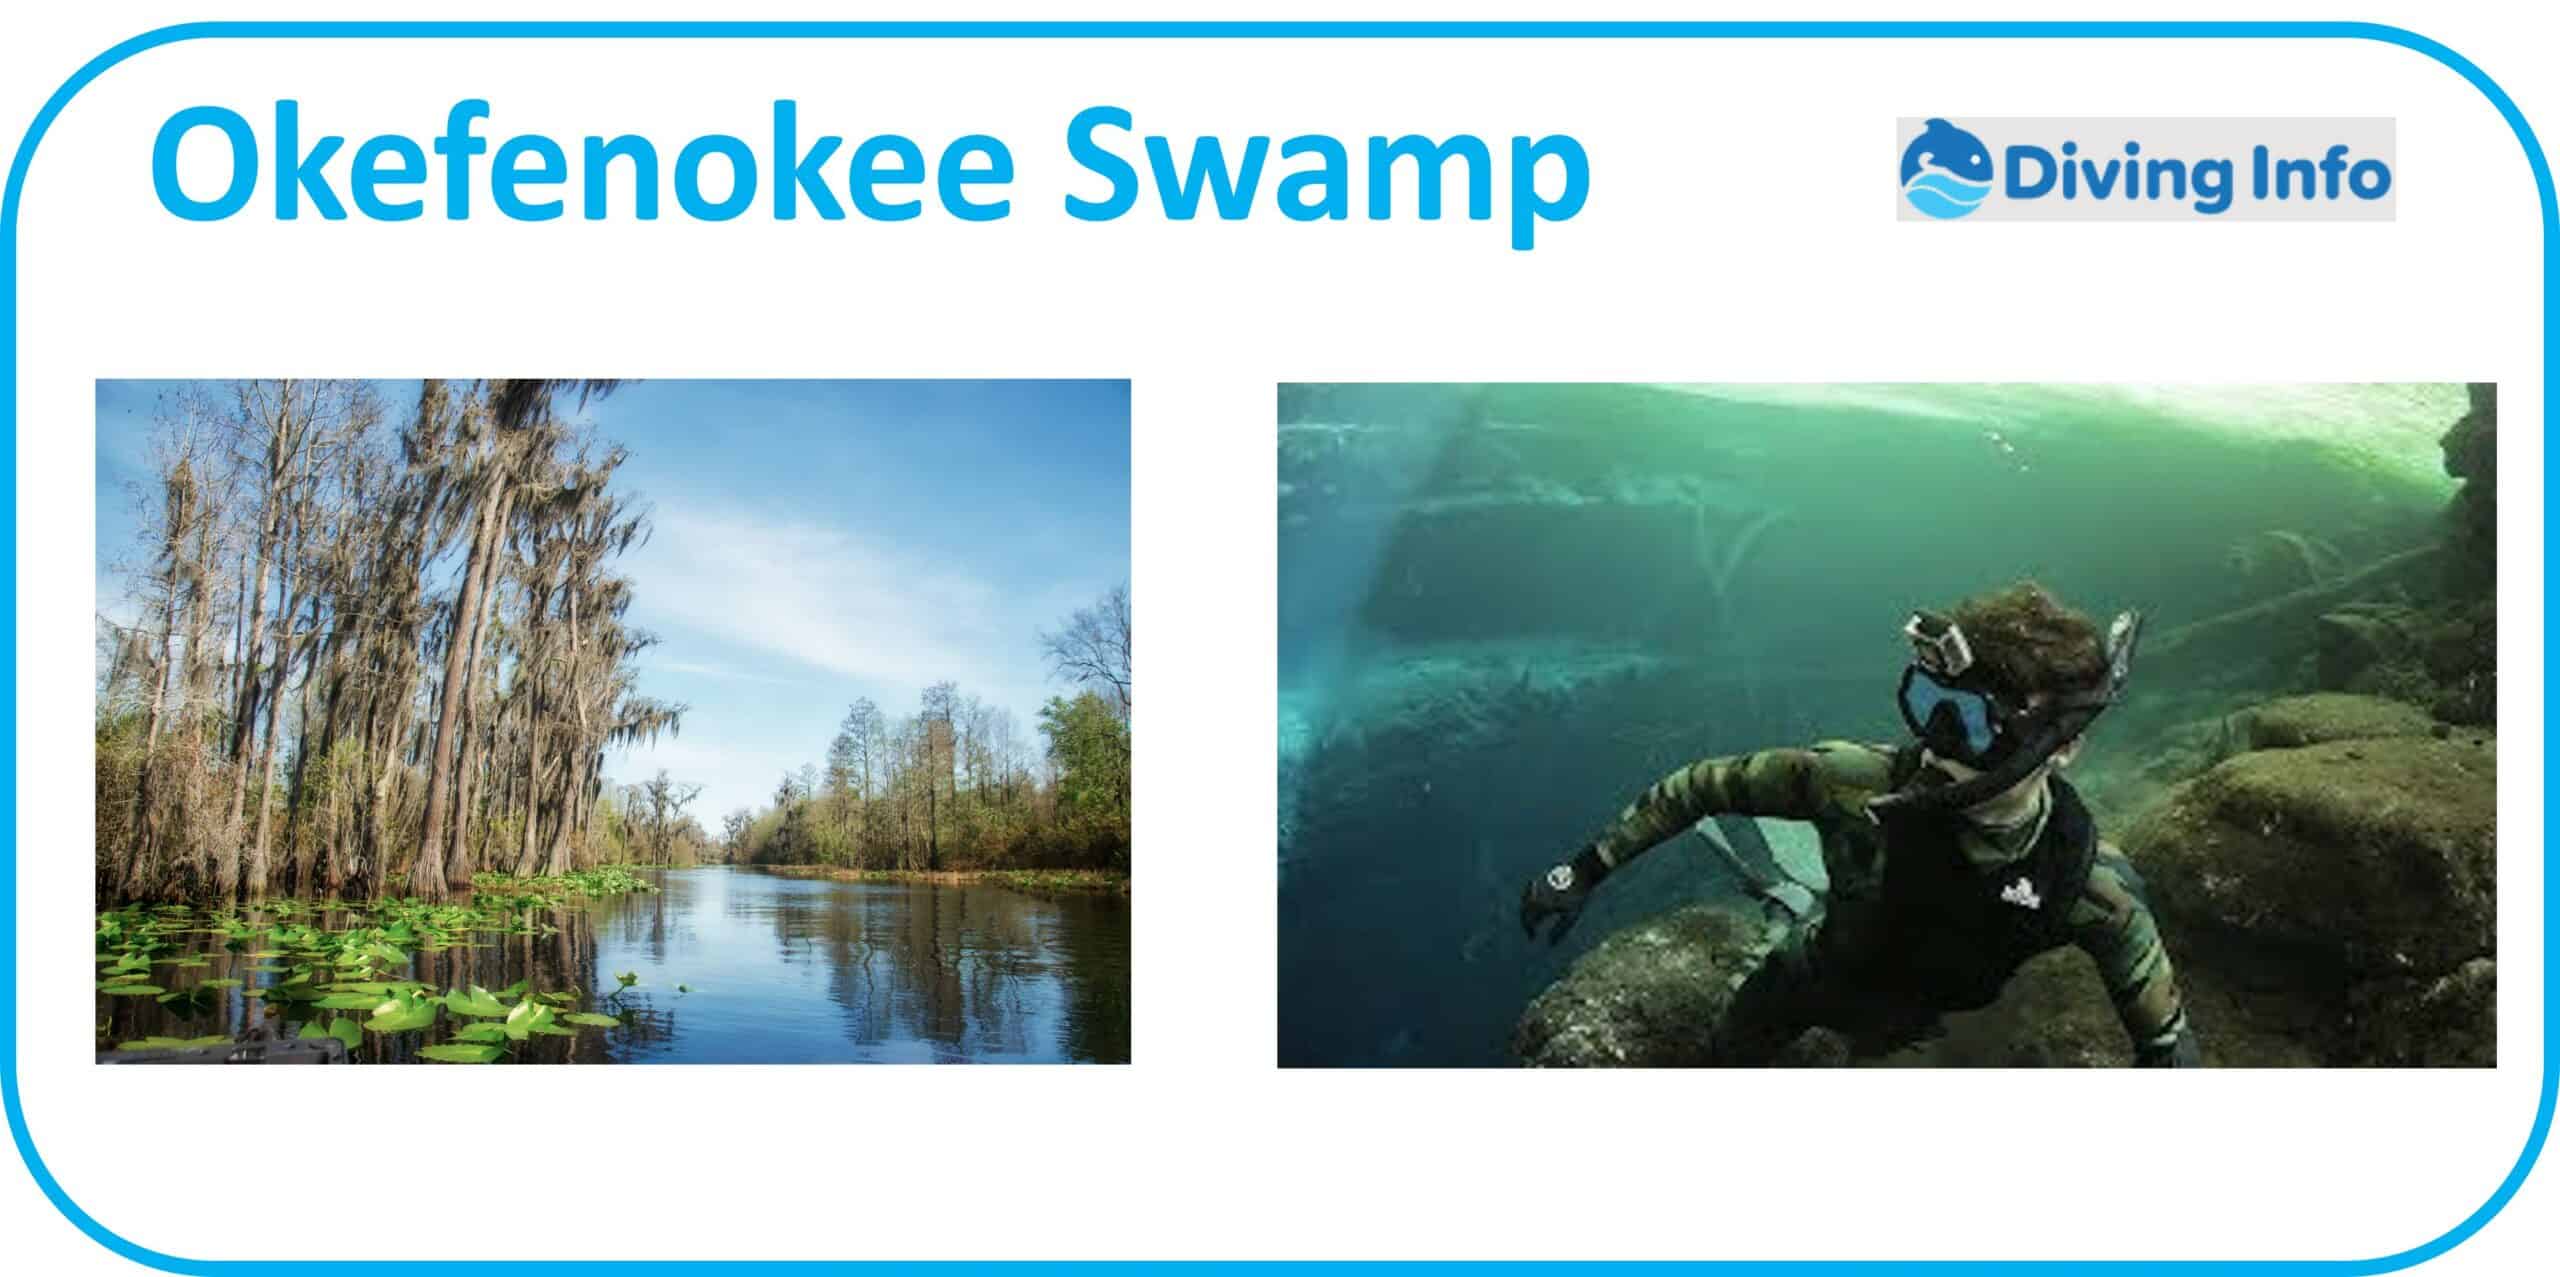 Diving in the Okefenokee Swamp